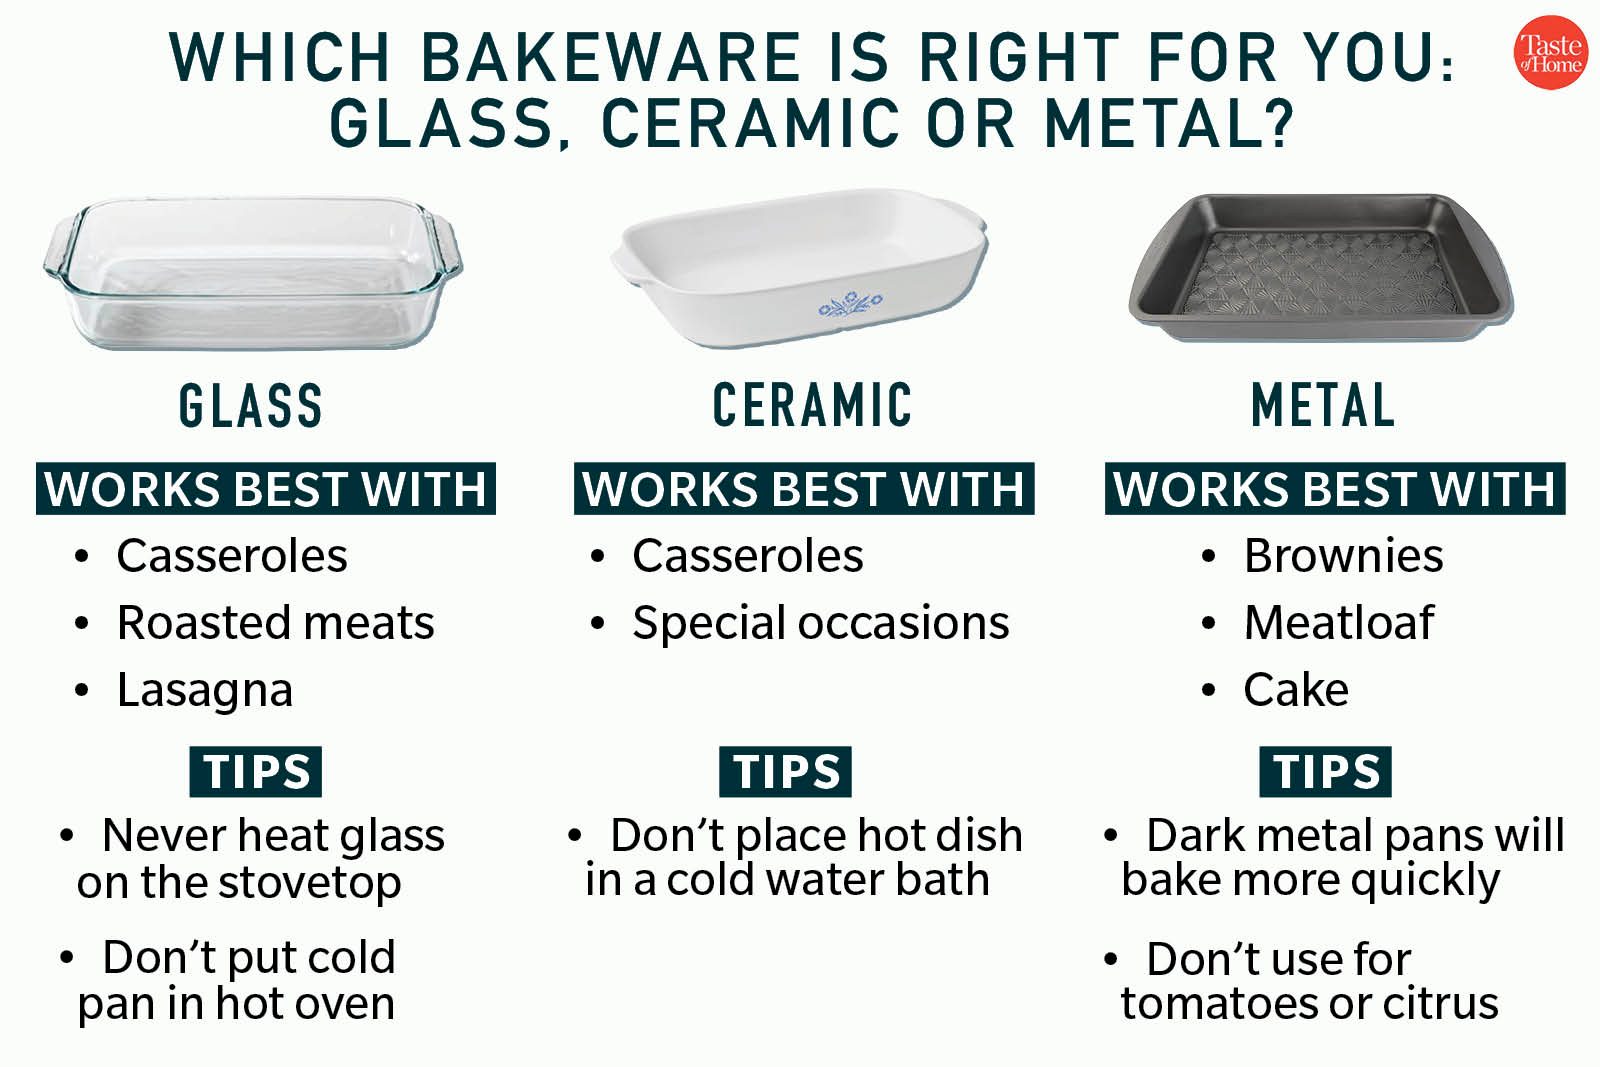 Is It Better to Bake in Glass or Metal?